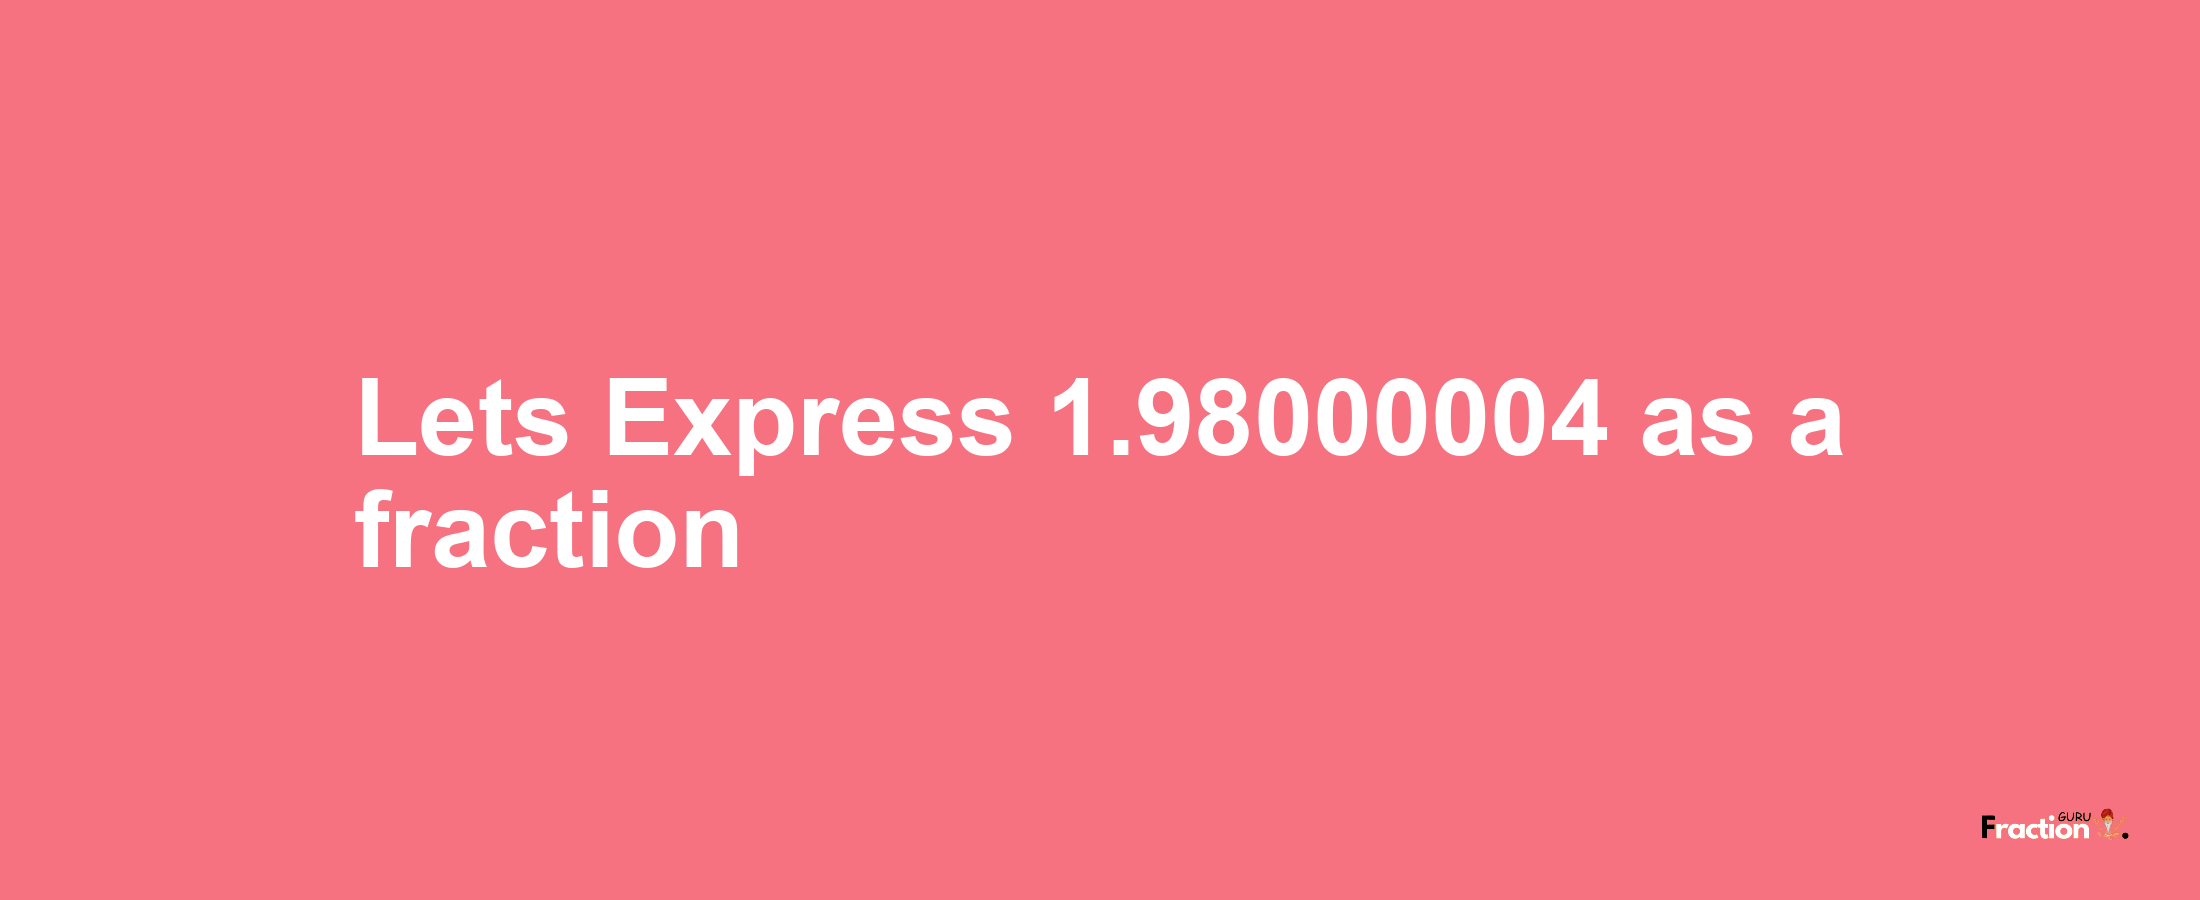 Lets Express 1.98000004 as afraction